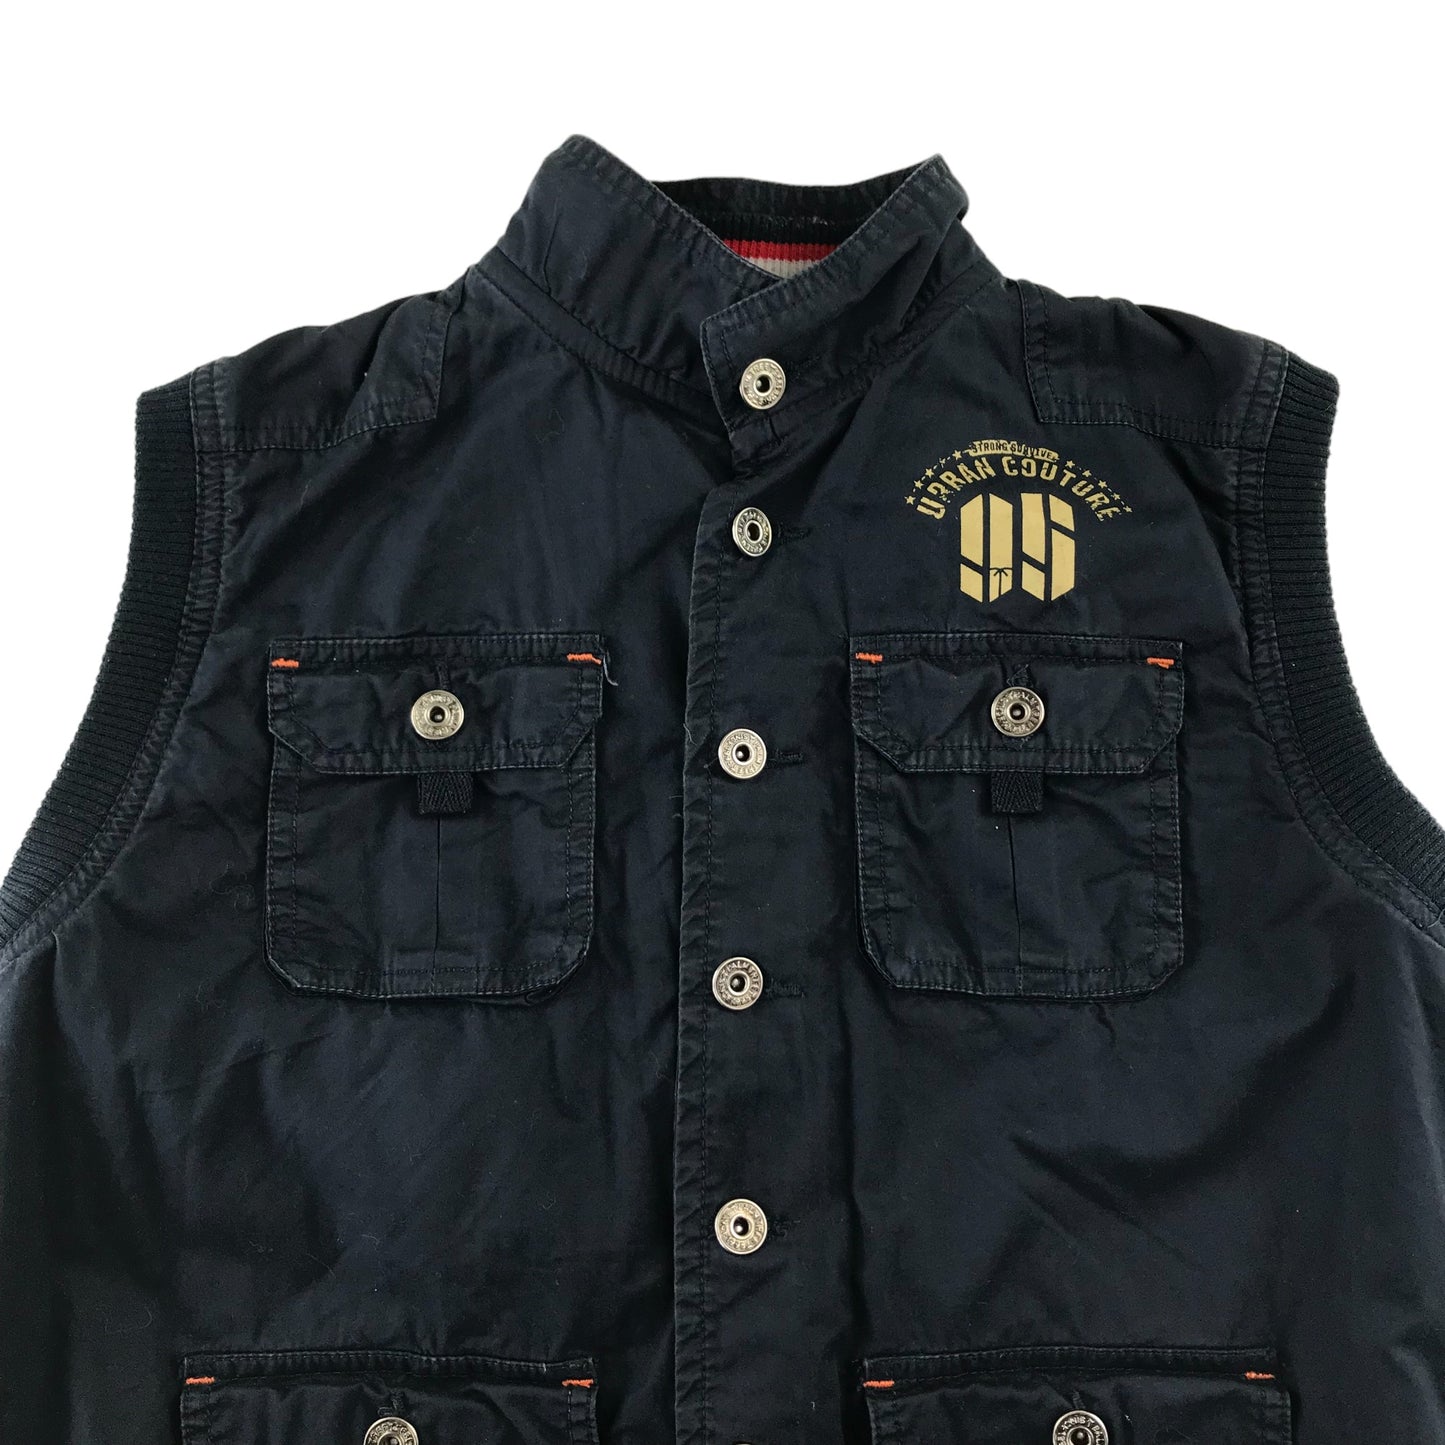 Palm Tree gilet 13-14 years navy blue bomber style casual cotton